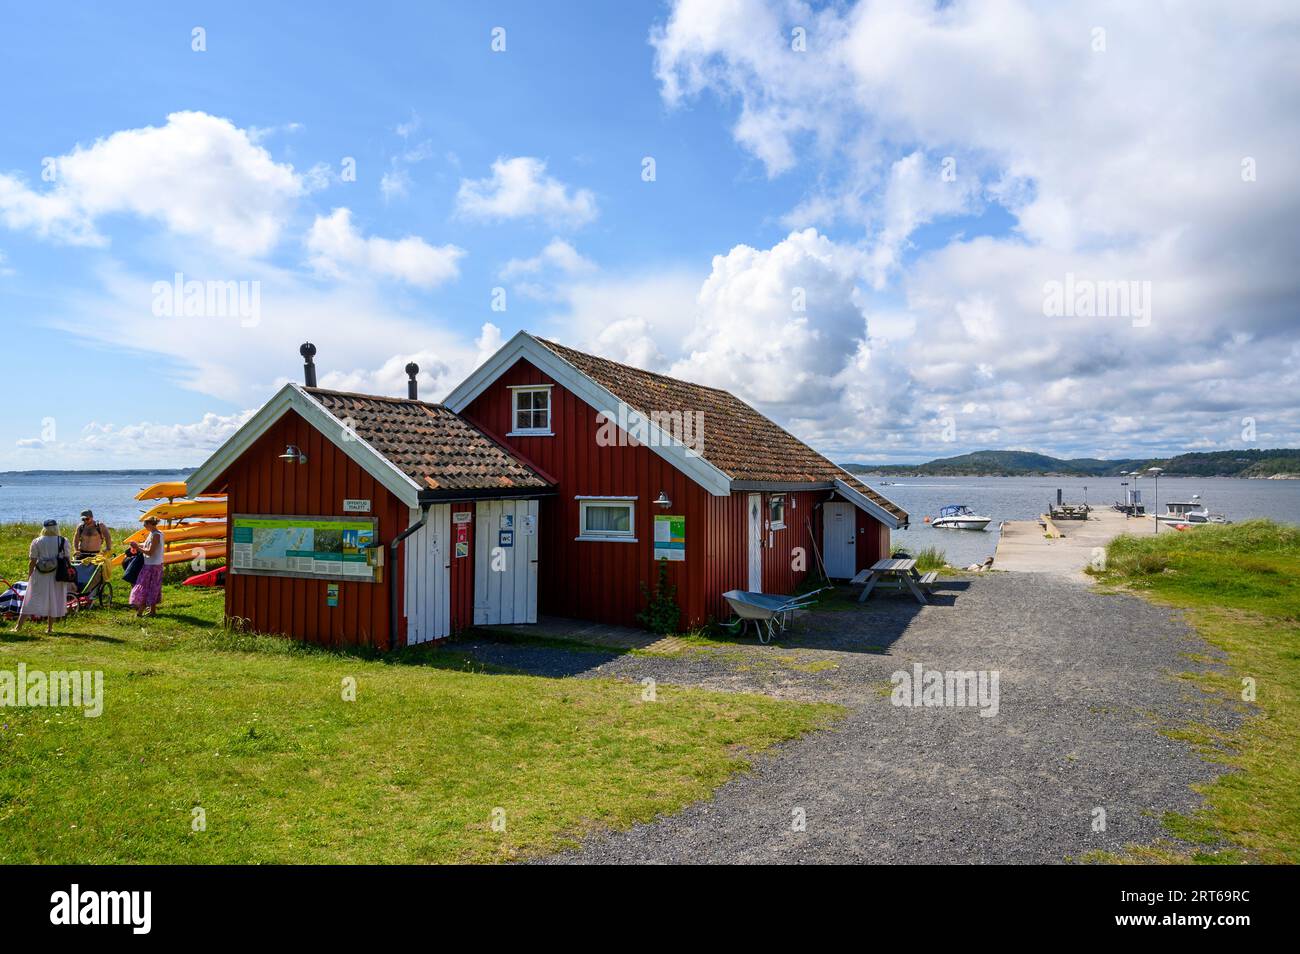 Øitangen on Jomfruland is a group of accommodation cabins and services run by The Norwegian Trekking Association for visitors to the island. Norway. Stock Photo